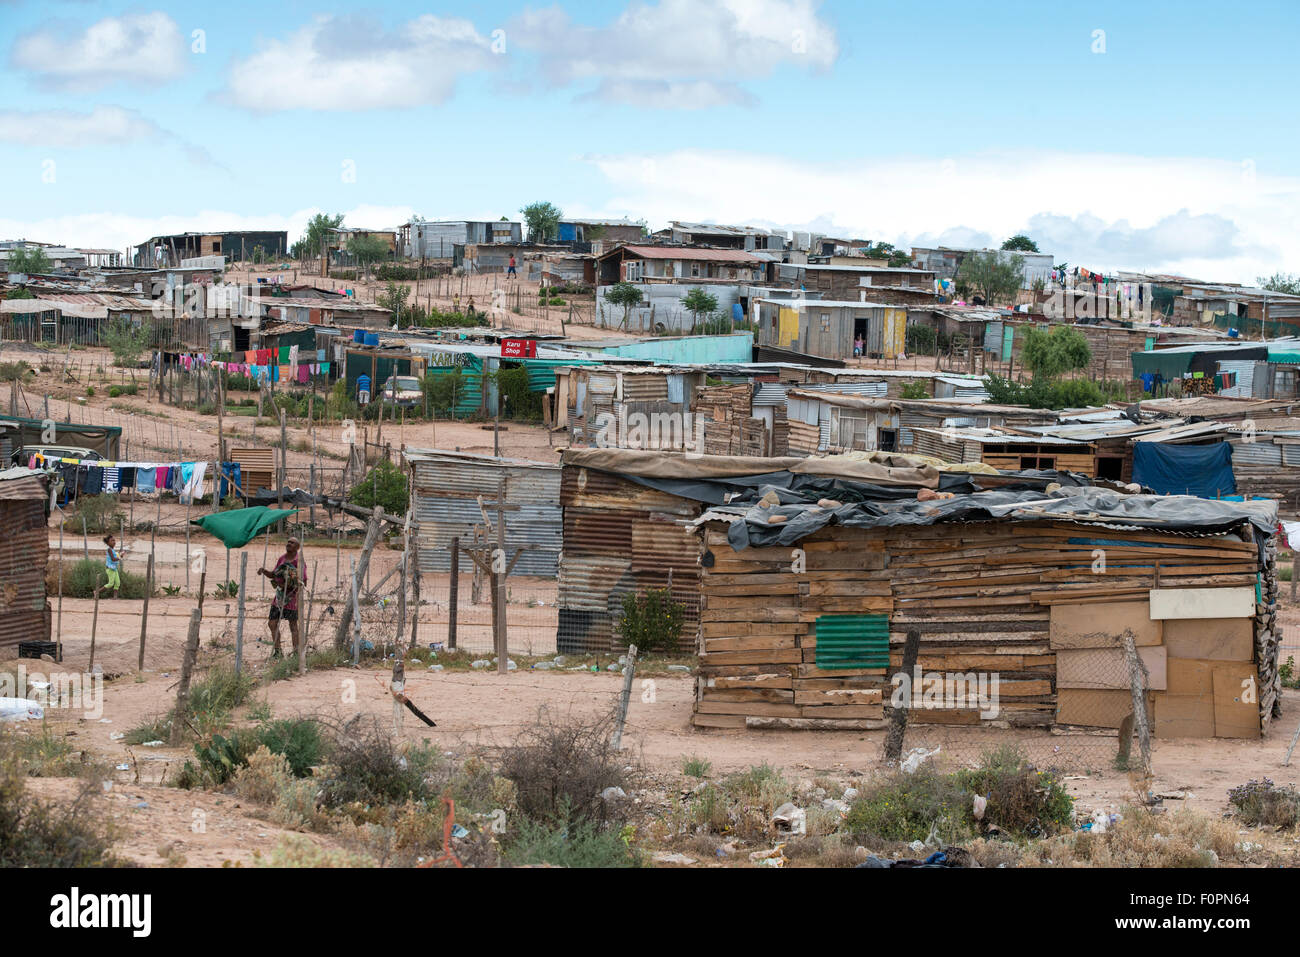 Sheds with clothes lines, township in Oudtshorn, Western Cape, South Africa Stock Photo